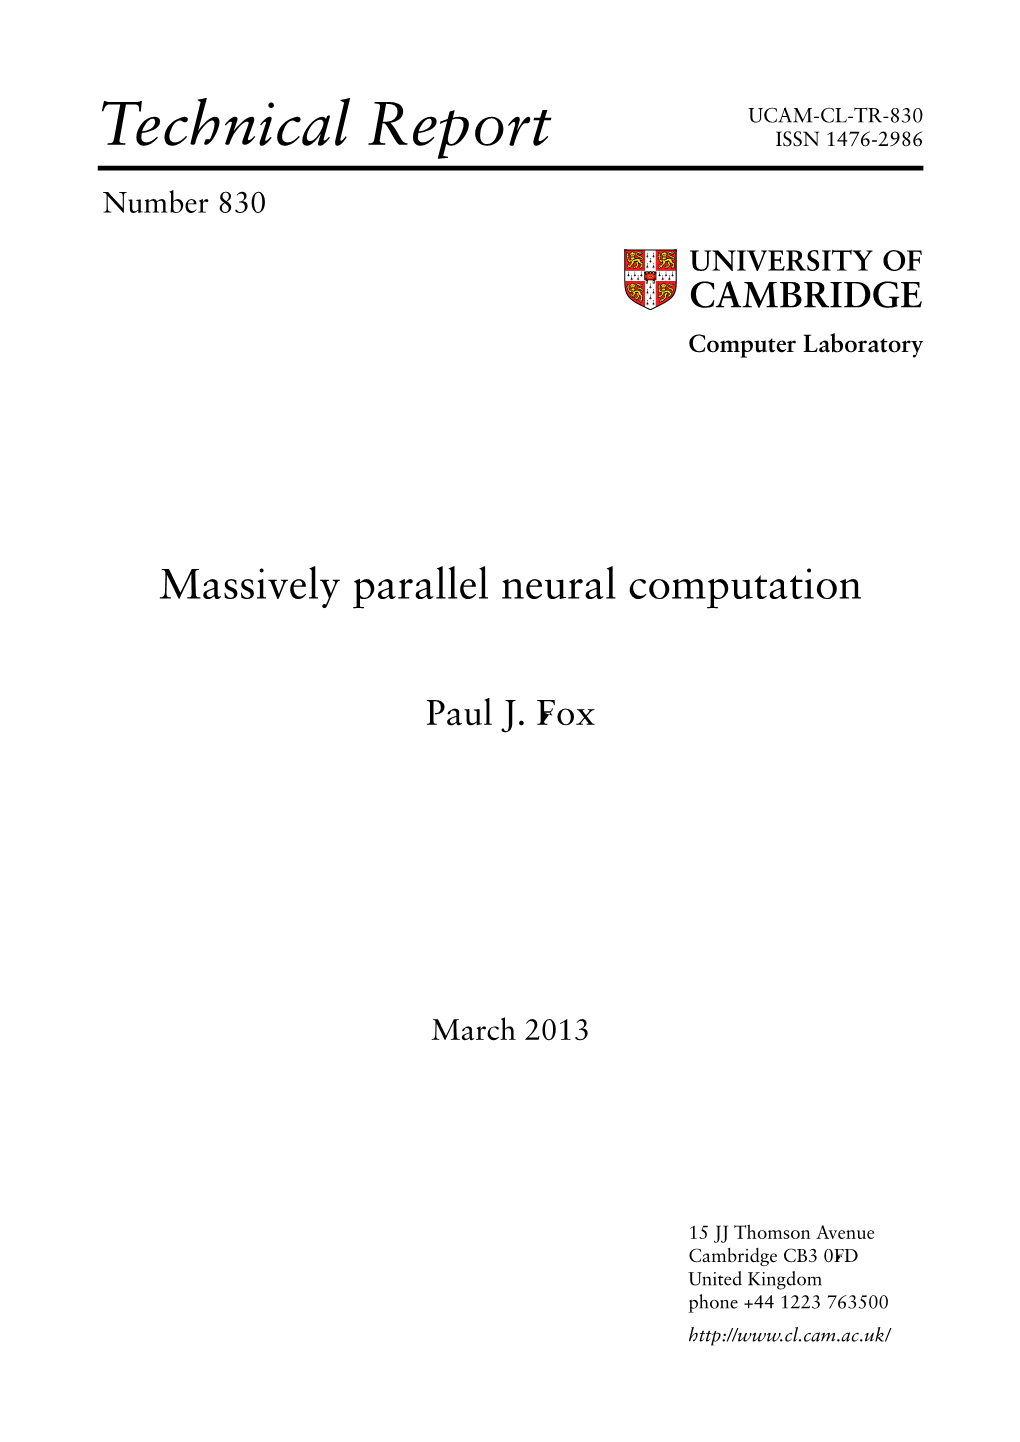 Massively Parallel Neural Computation